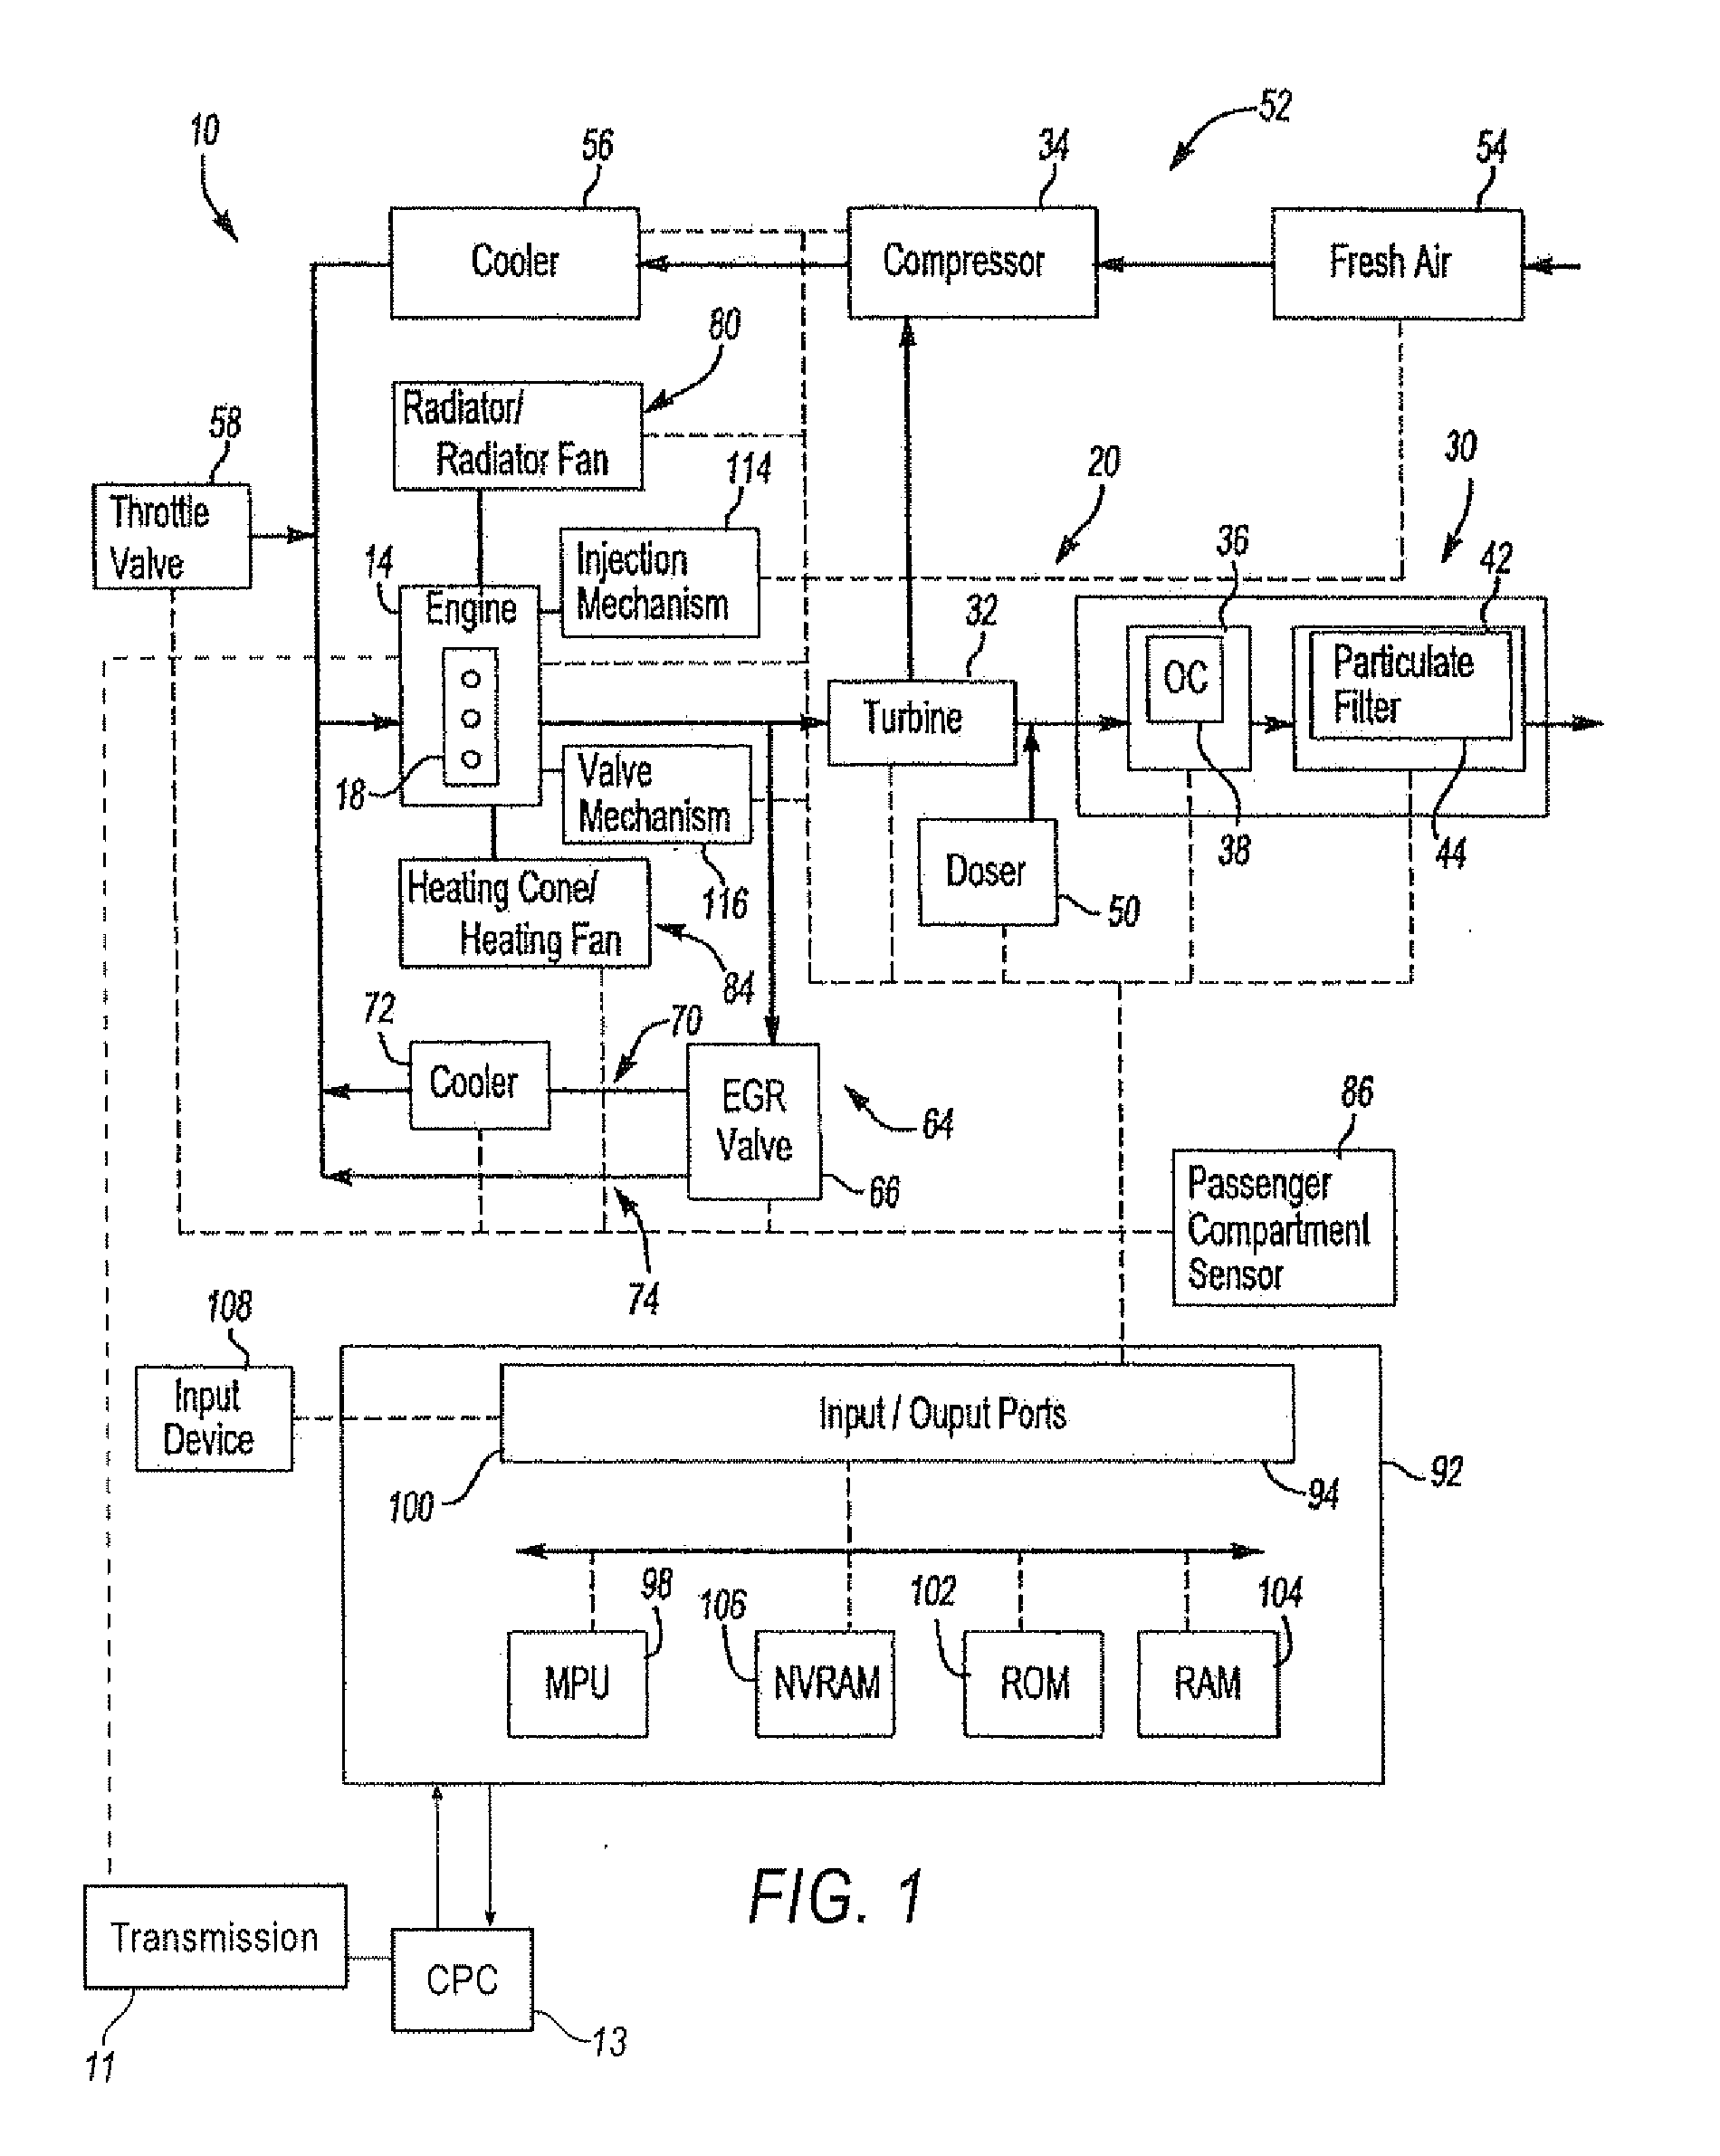 Method of verifying component functionality on egr & air systems